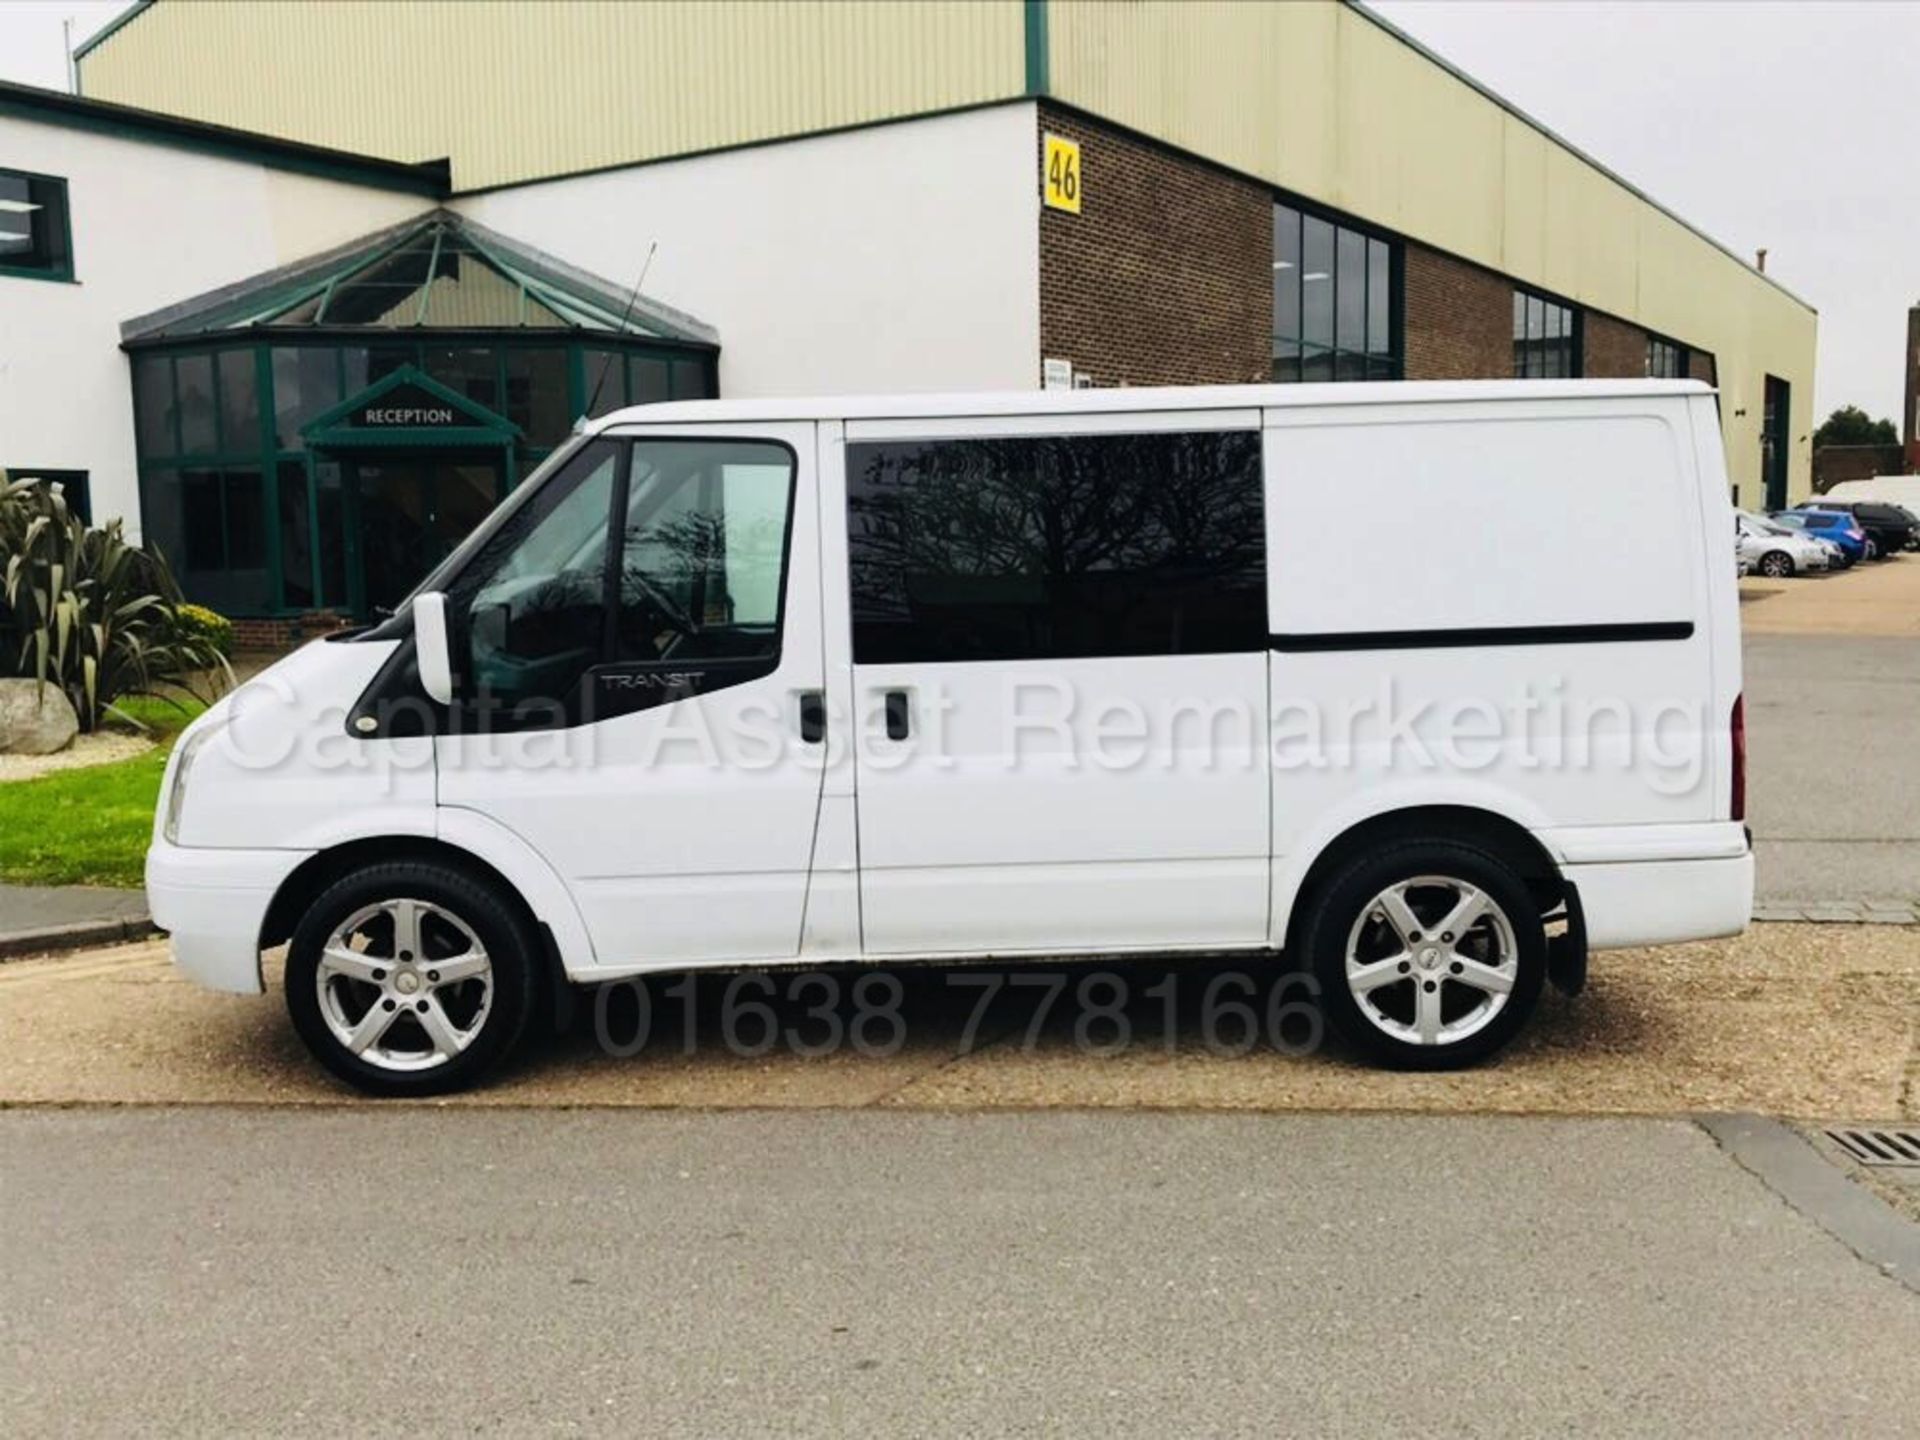 FORD TRANSIT 85 T260 SWB *SPORTY* (2010 MODEL) '2.2 TDCI - 85 PS - 5 SPEED' (NO VAT - SAVE 20%) - Image 2 of 22